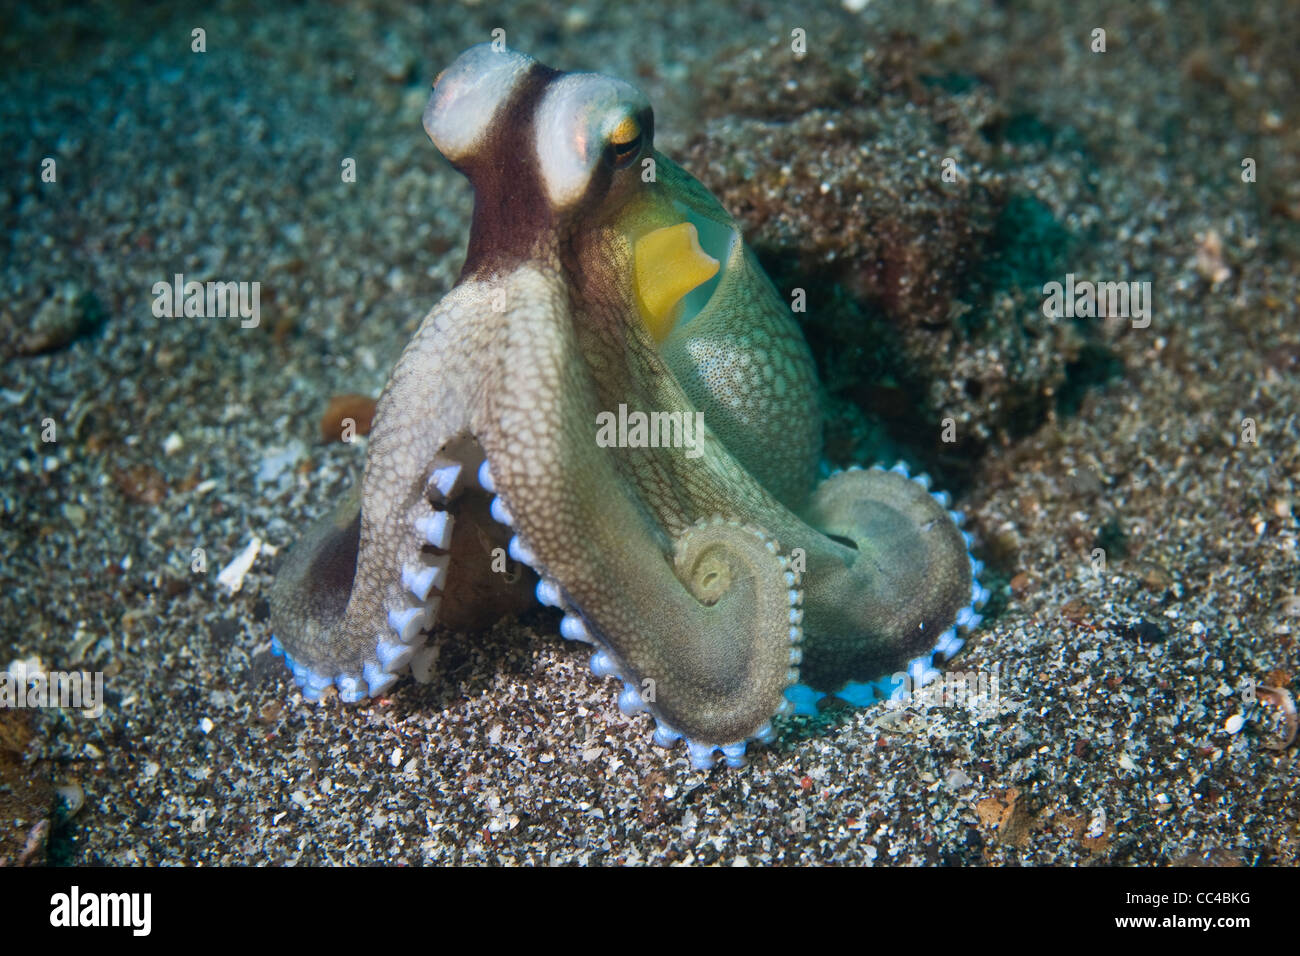 A Coconut octopus (Amphioctopus marginatus), also known as Veined octopus, often takes refuge in empty shells or coconuts. Stock Photo